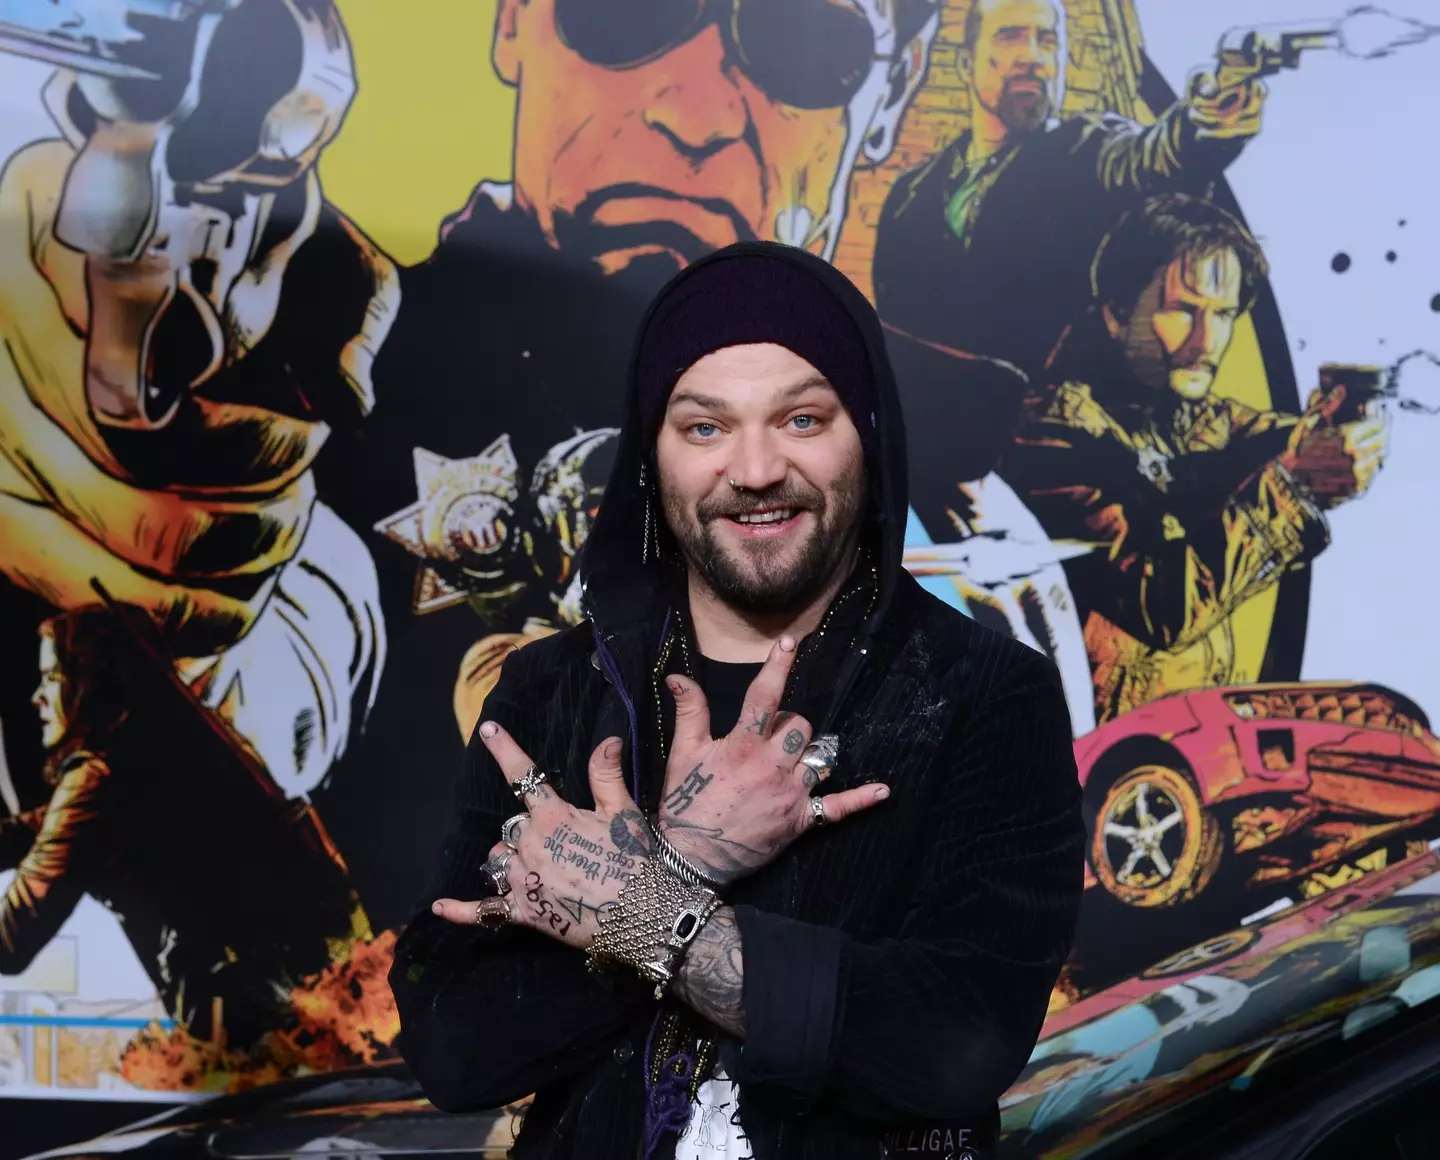 Bam Margera has completed a one year drug and alcohol treatment programme.